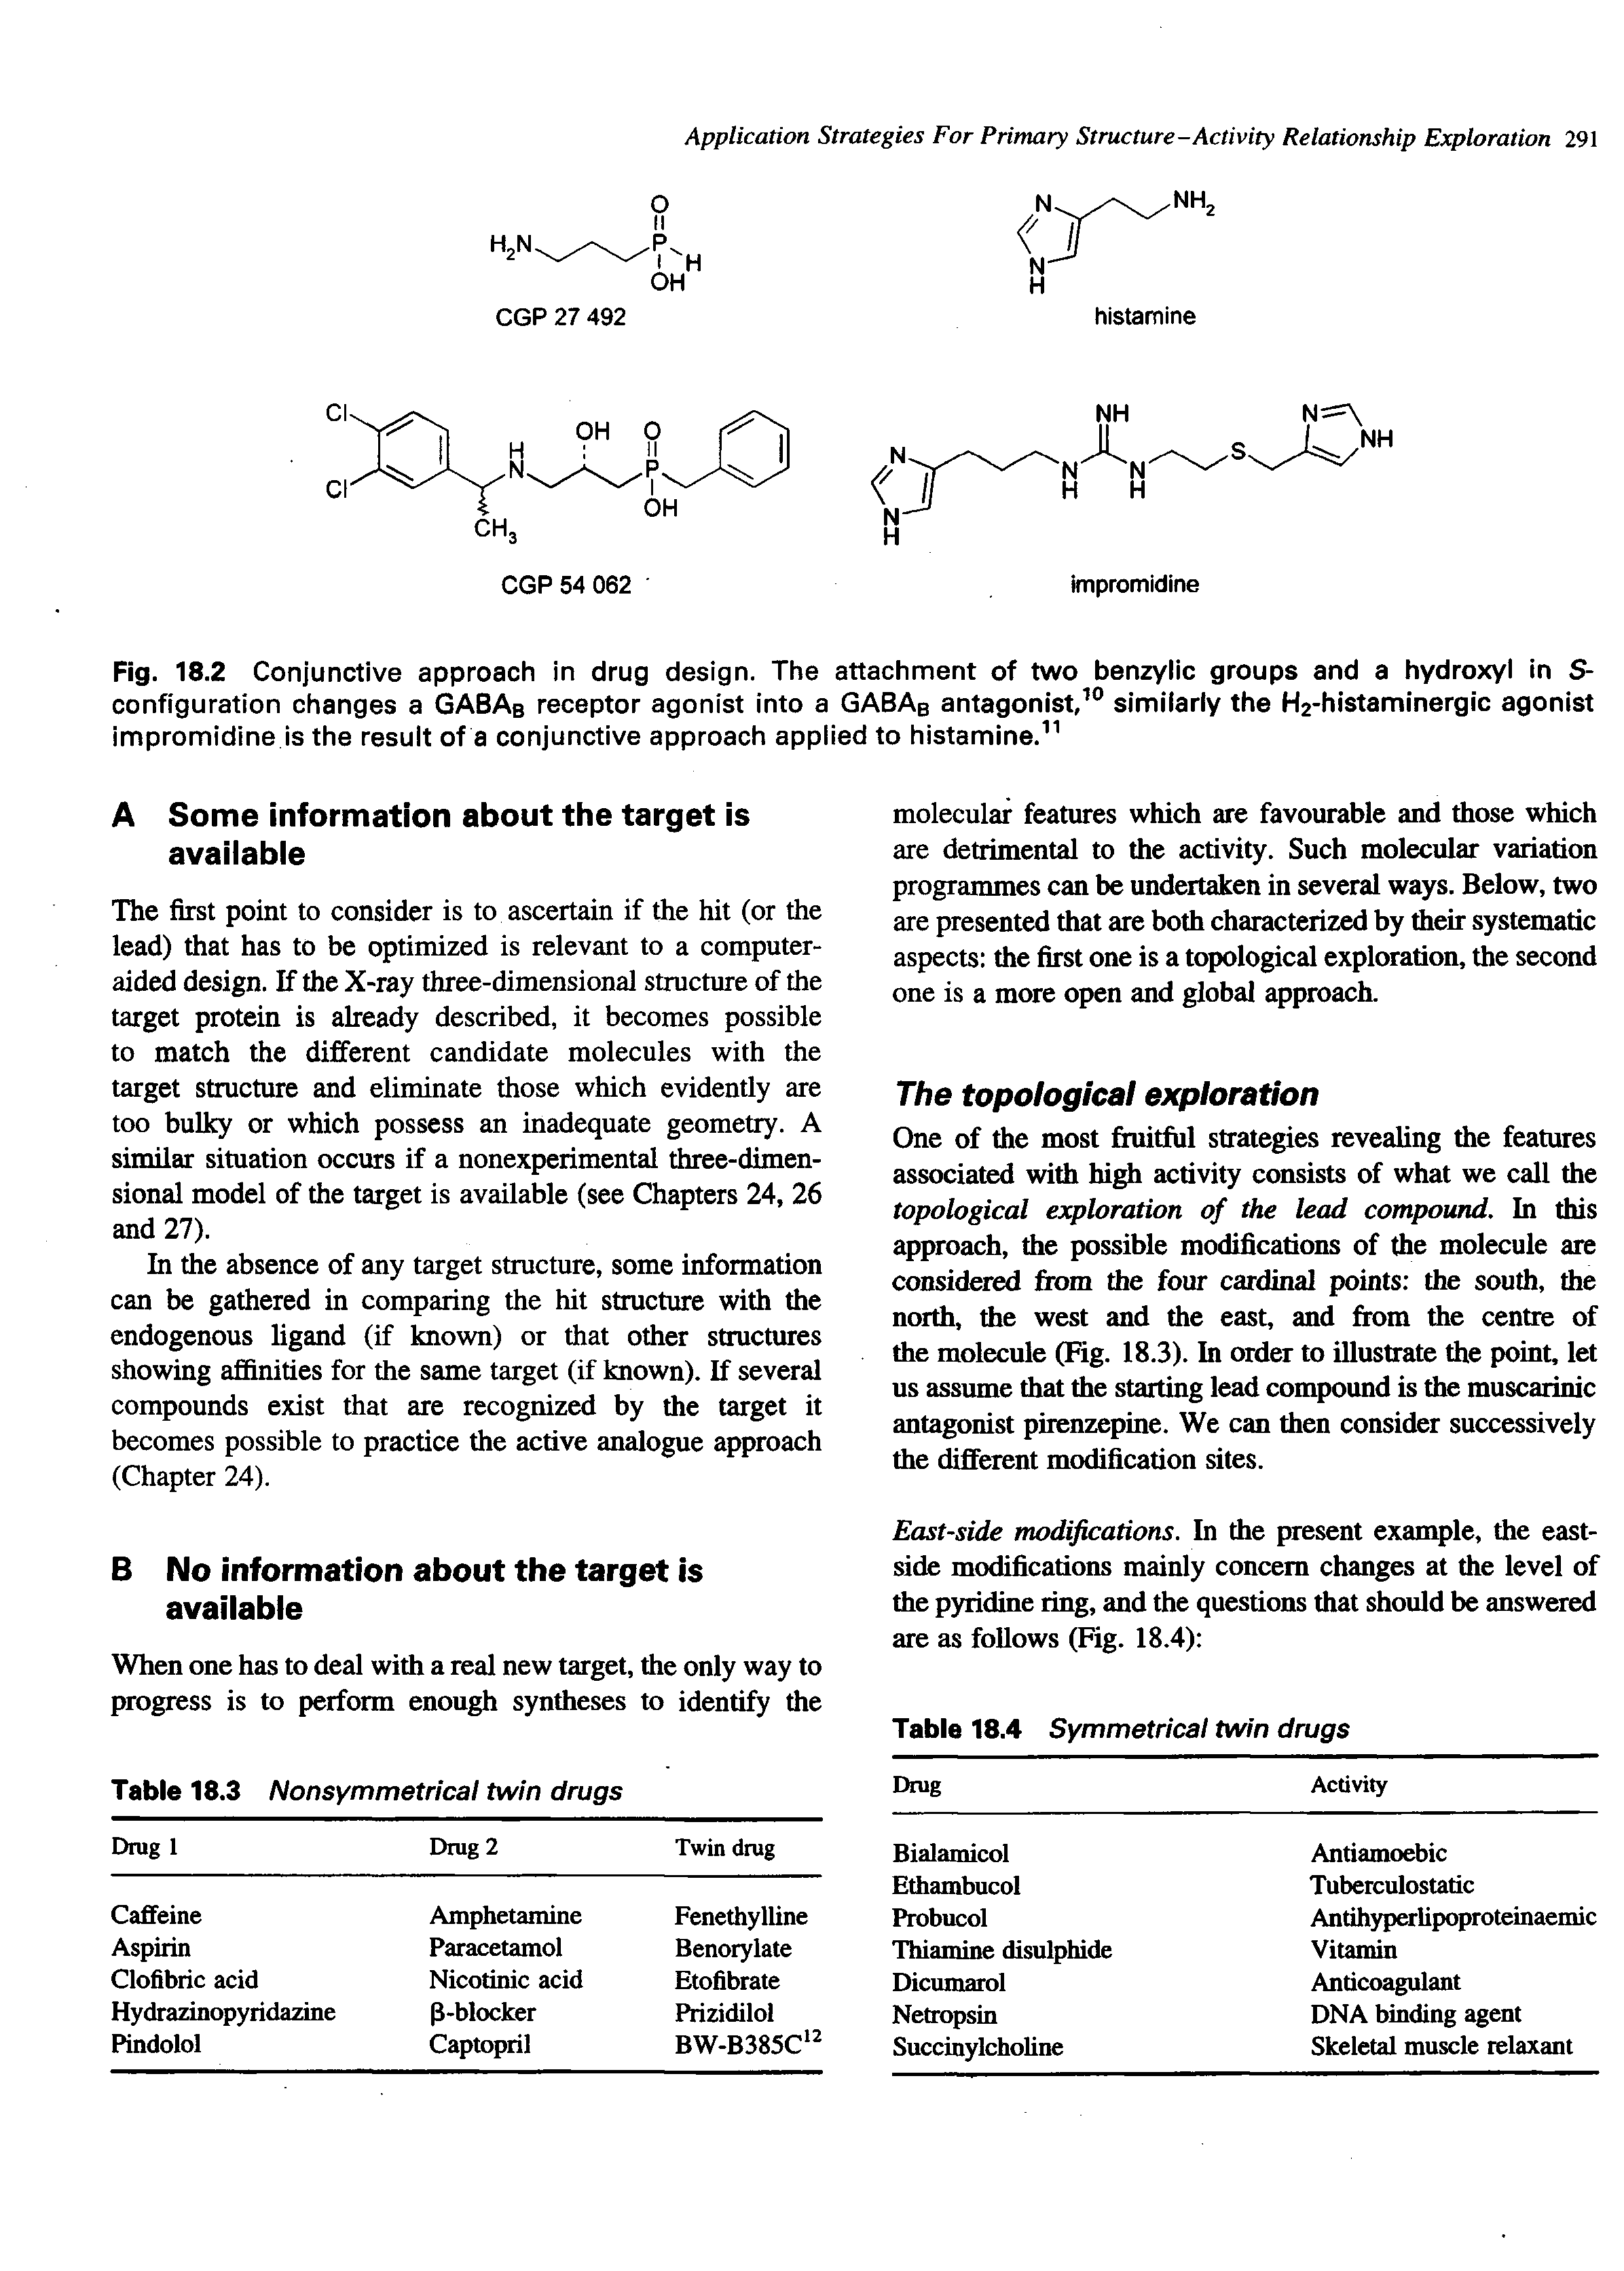 Fig. 18.2 Conjunctive approach in drug design. The attachment of two benzylic groups and a hydroxyi in S-configuration changes a GABAb receptor agonist into a GABAb antagonist, similarly the H2-histaminergic agonist impromidine is the result of a conjunctive approach applied to histamine. ...